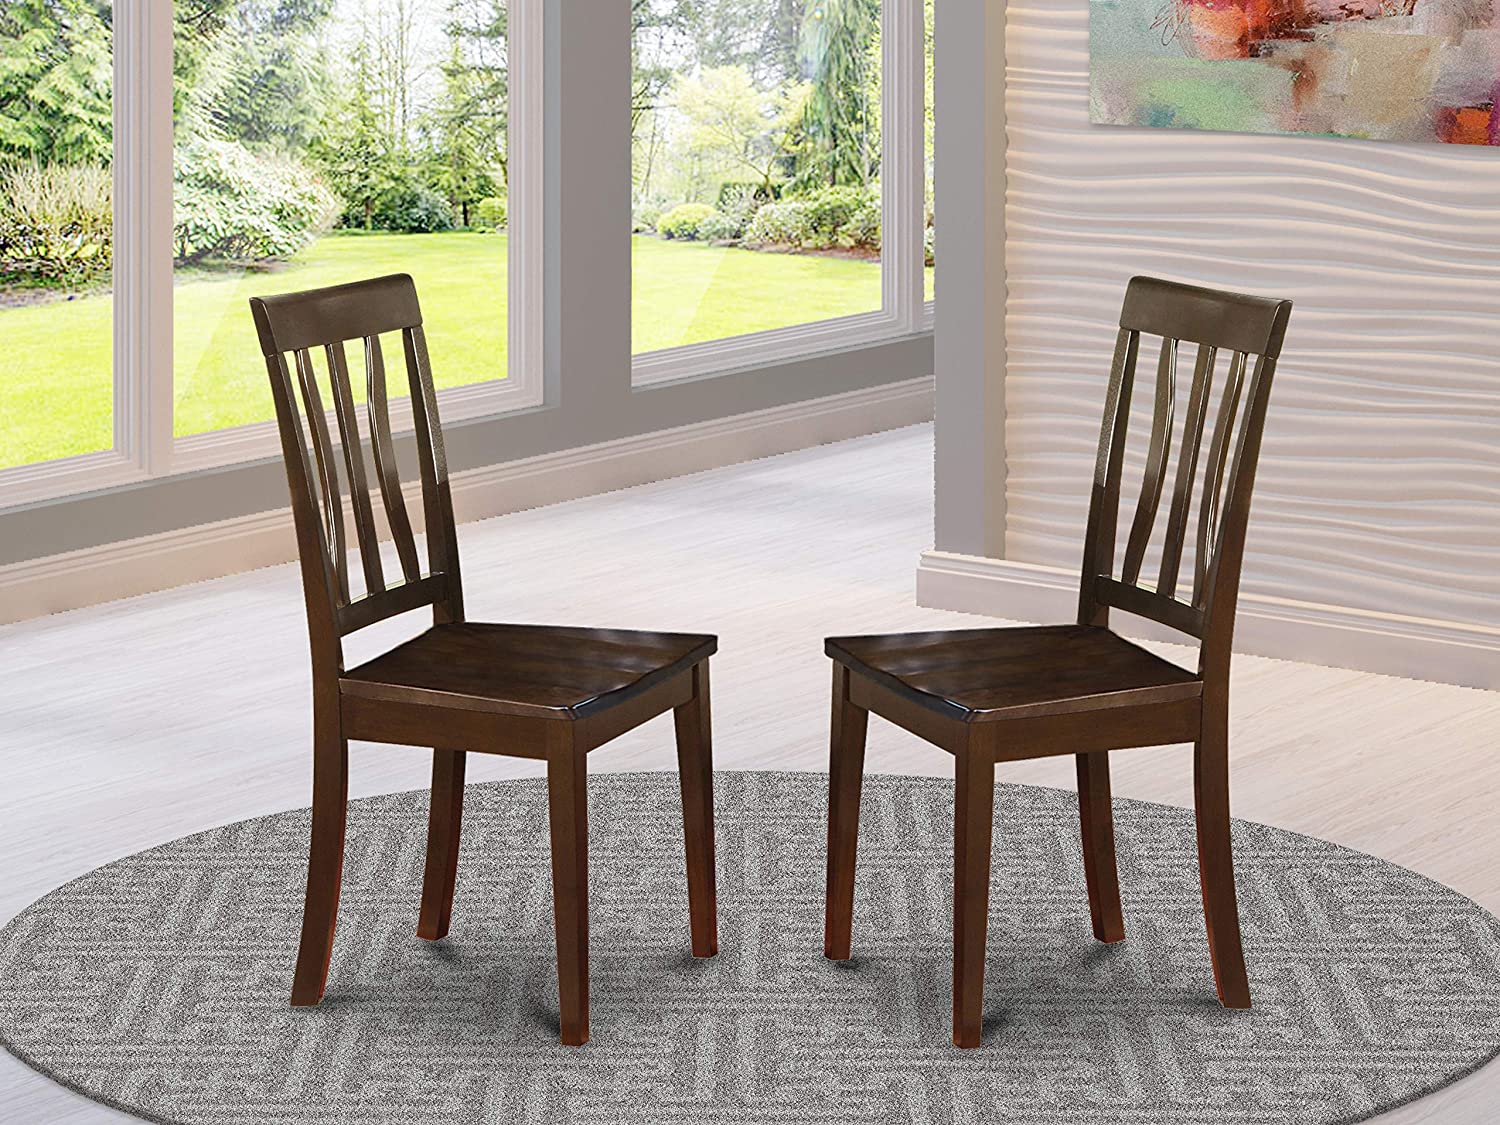 East West Furniture Antique Wooden Dining Chairs Wooden Seat and Buttermilk Hardwood Frame Kitchen Dining Chair Set of 2